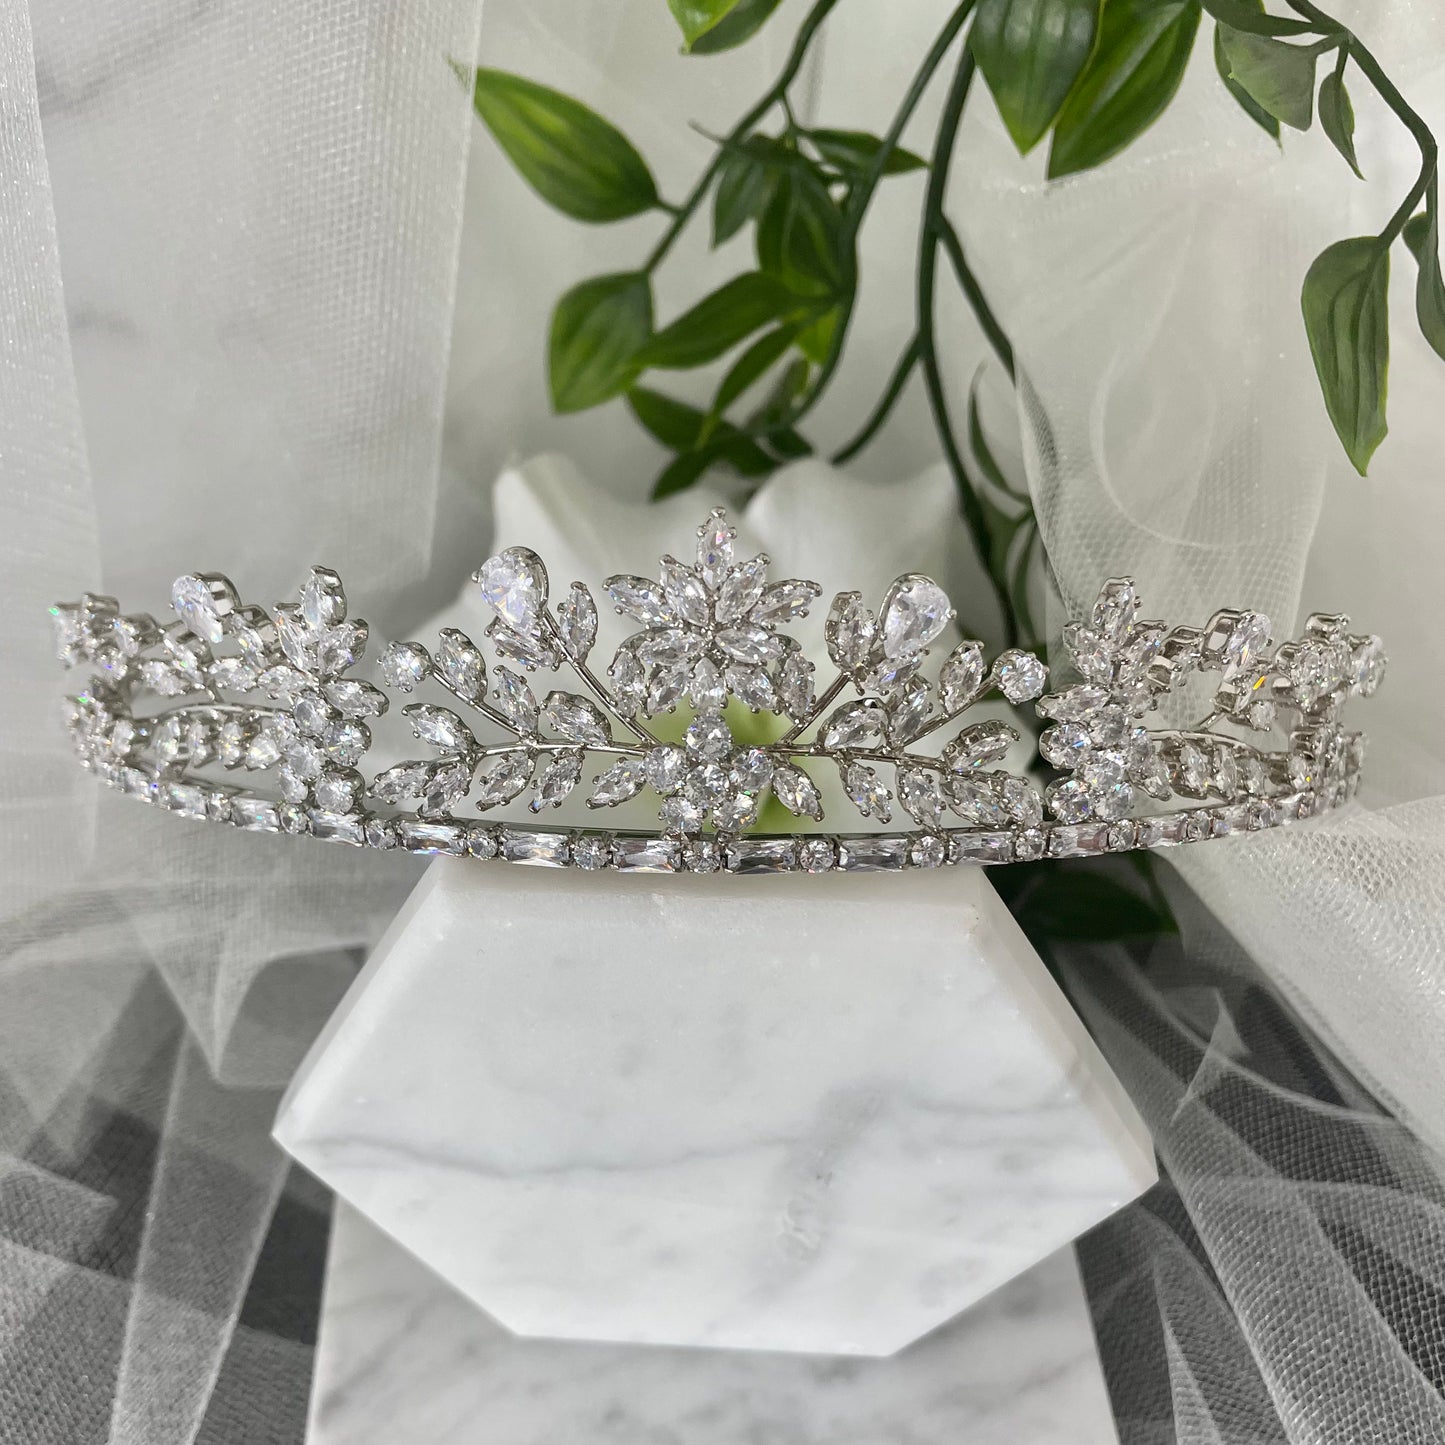 Nia Rhinestone Crystal Bridal Wedding Tiara in Silver, featuring an elegant design of diamanté crystals in floral and leaf patterns, perfect for enhancing a modern bride's look.